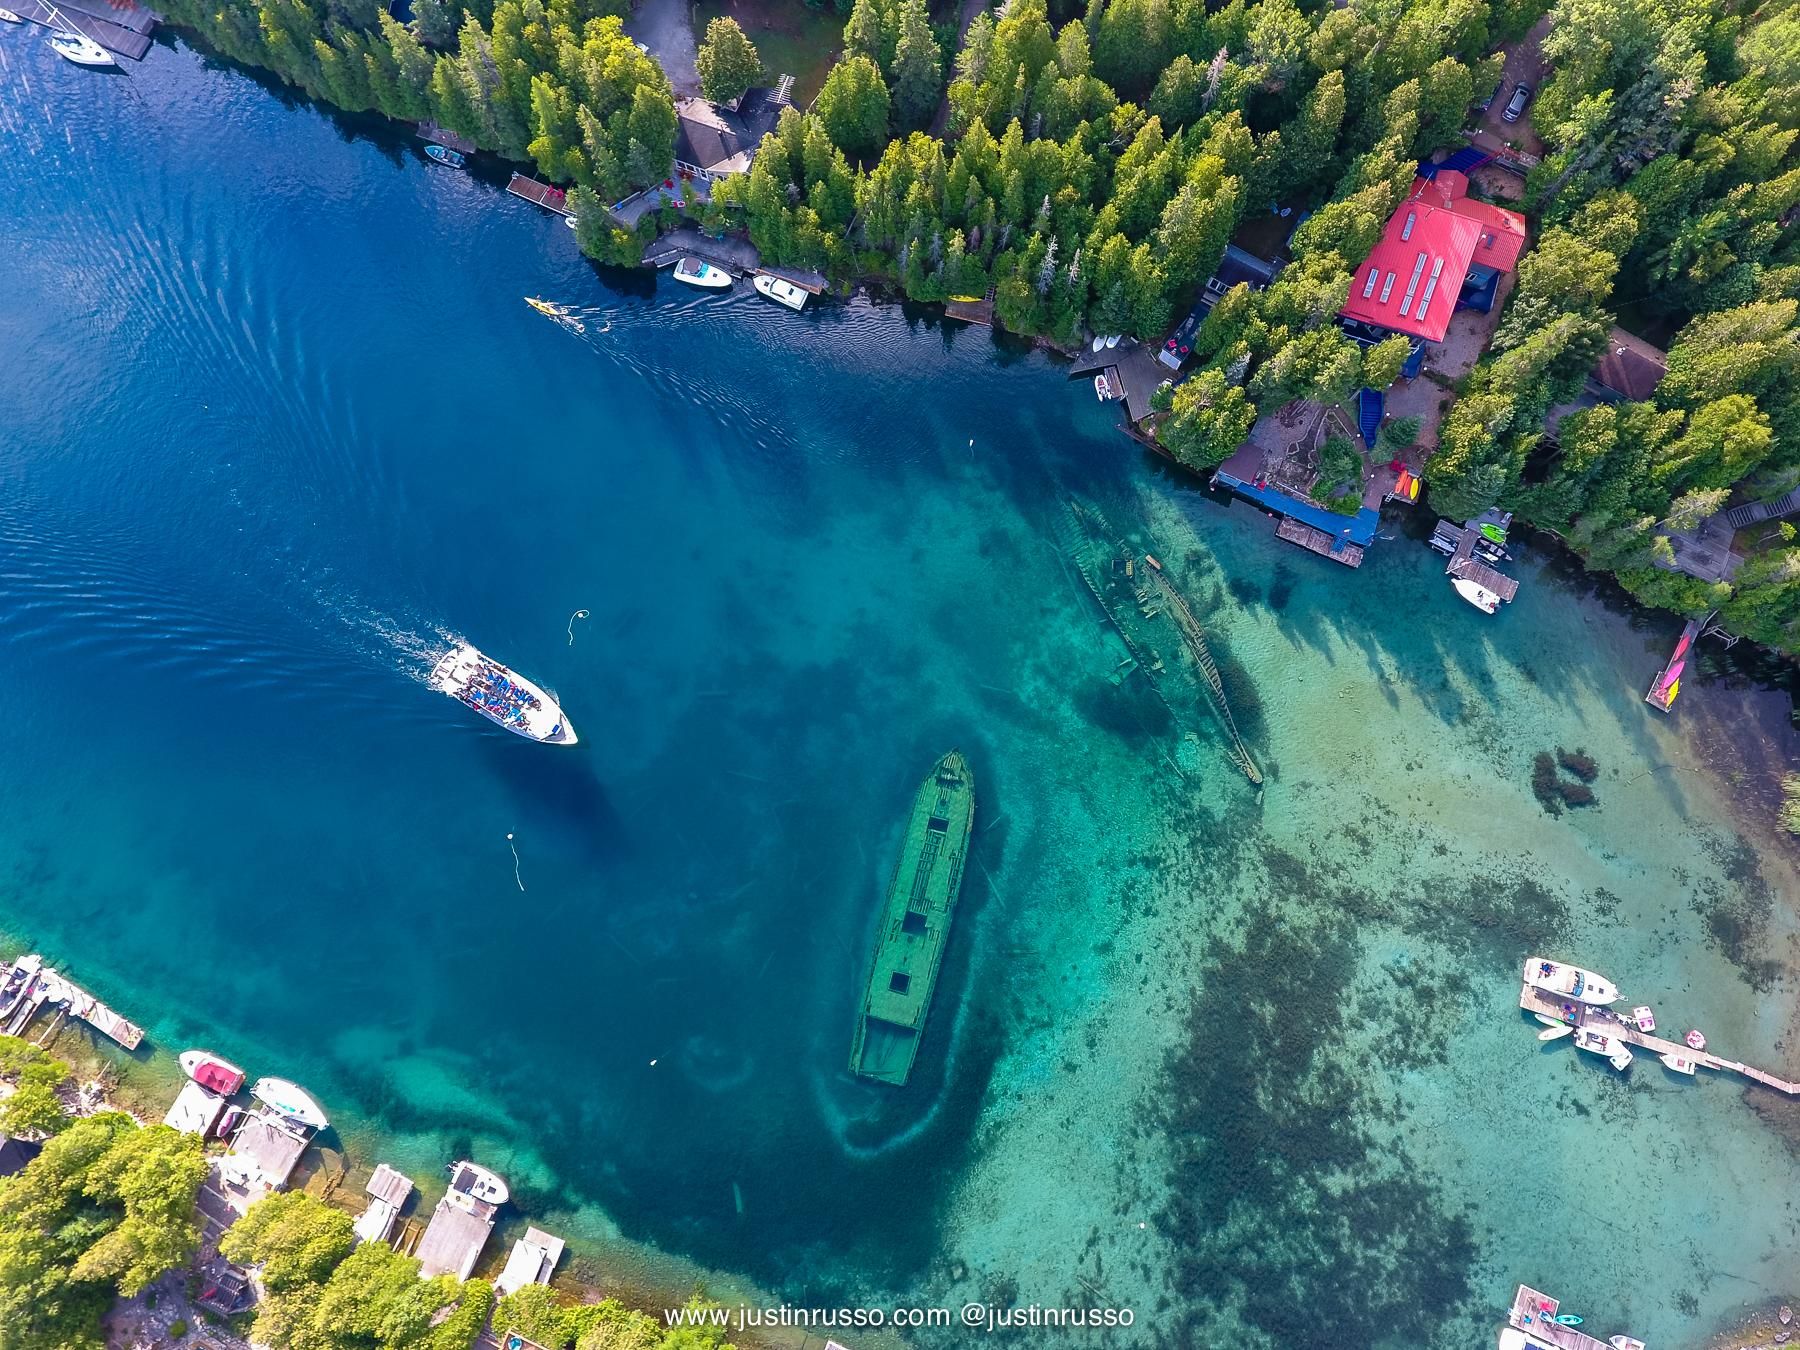 Droned The Shipwrecks in Tobermory, Ontario last weekend.